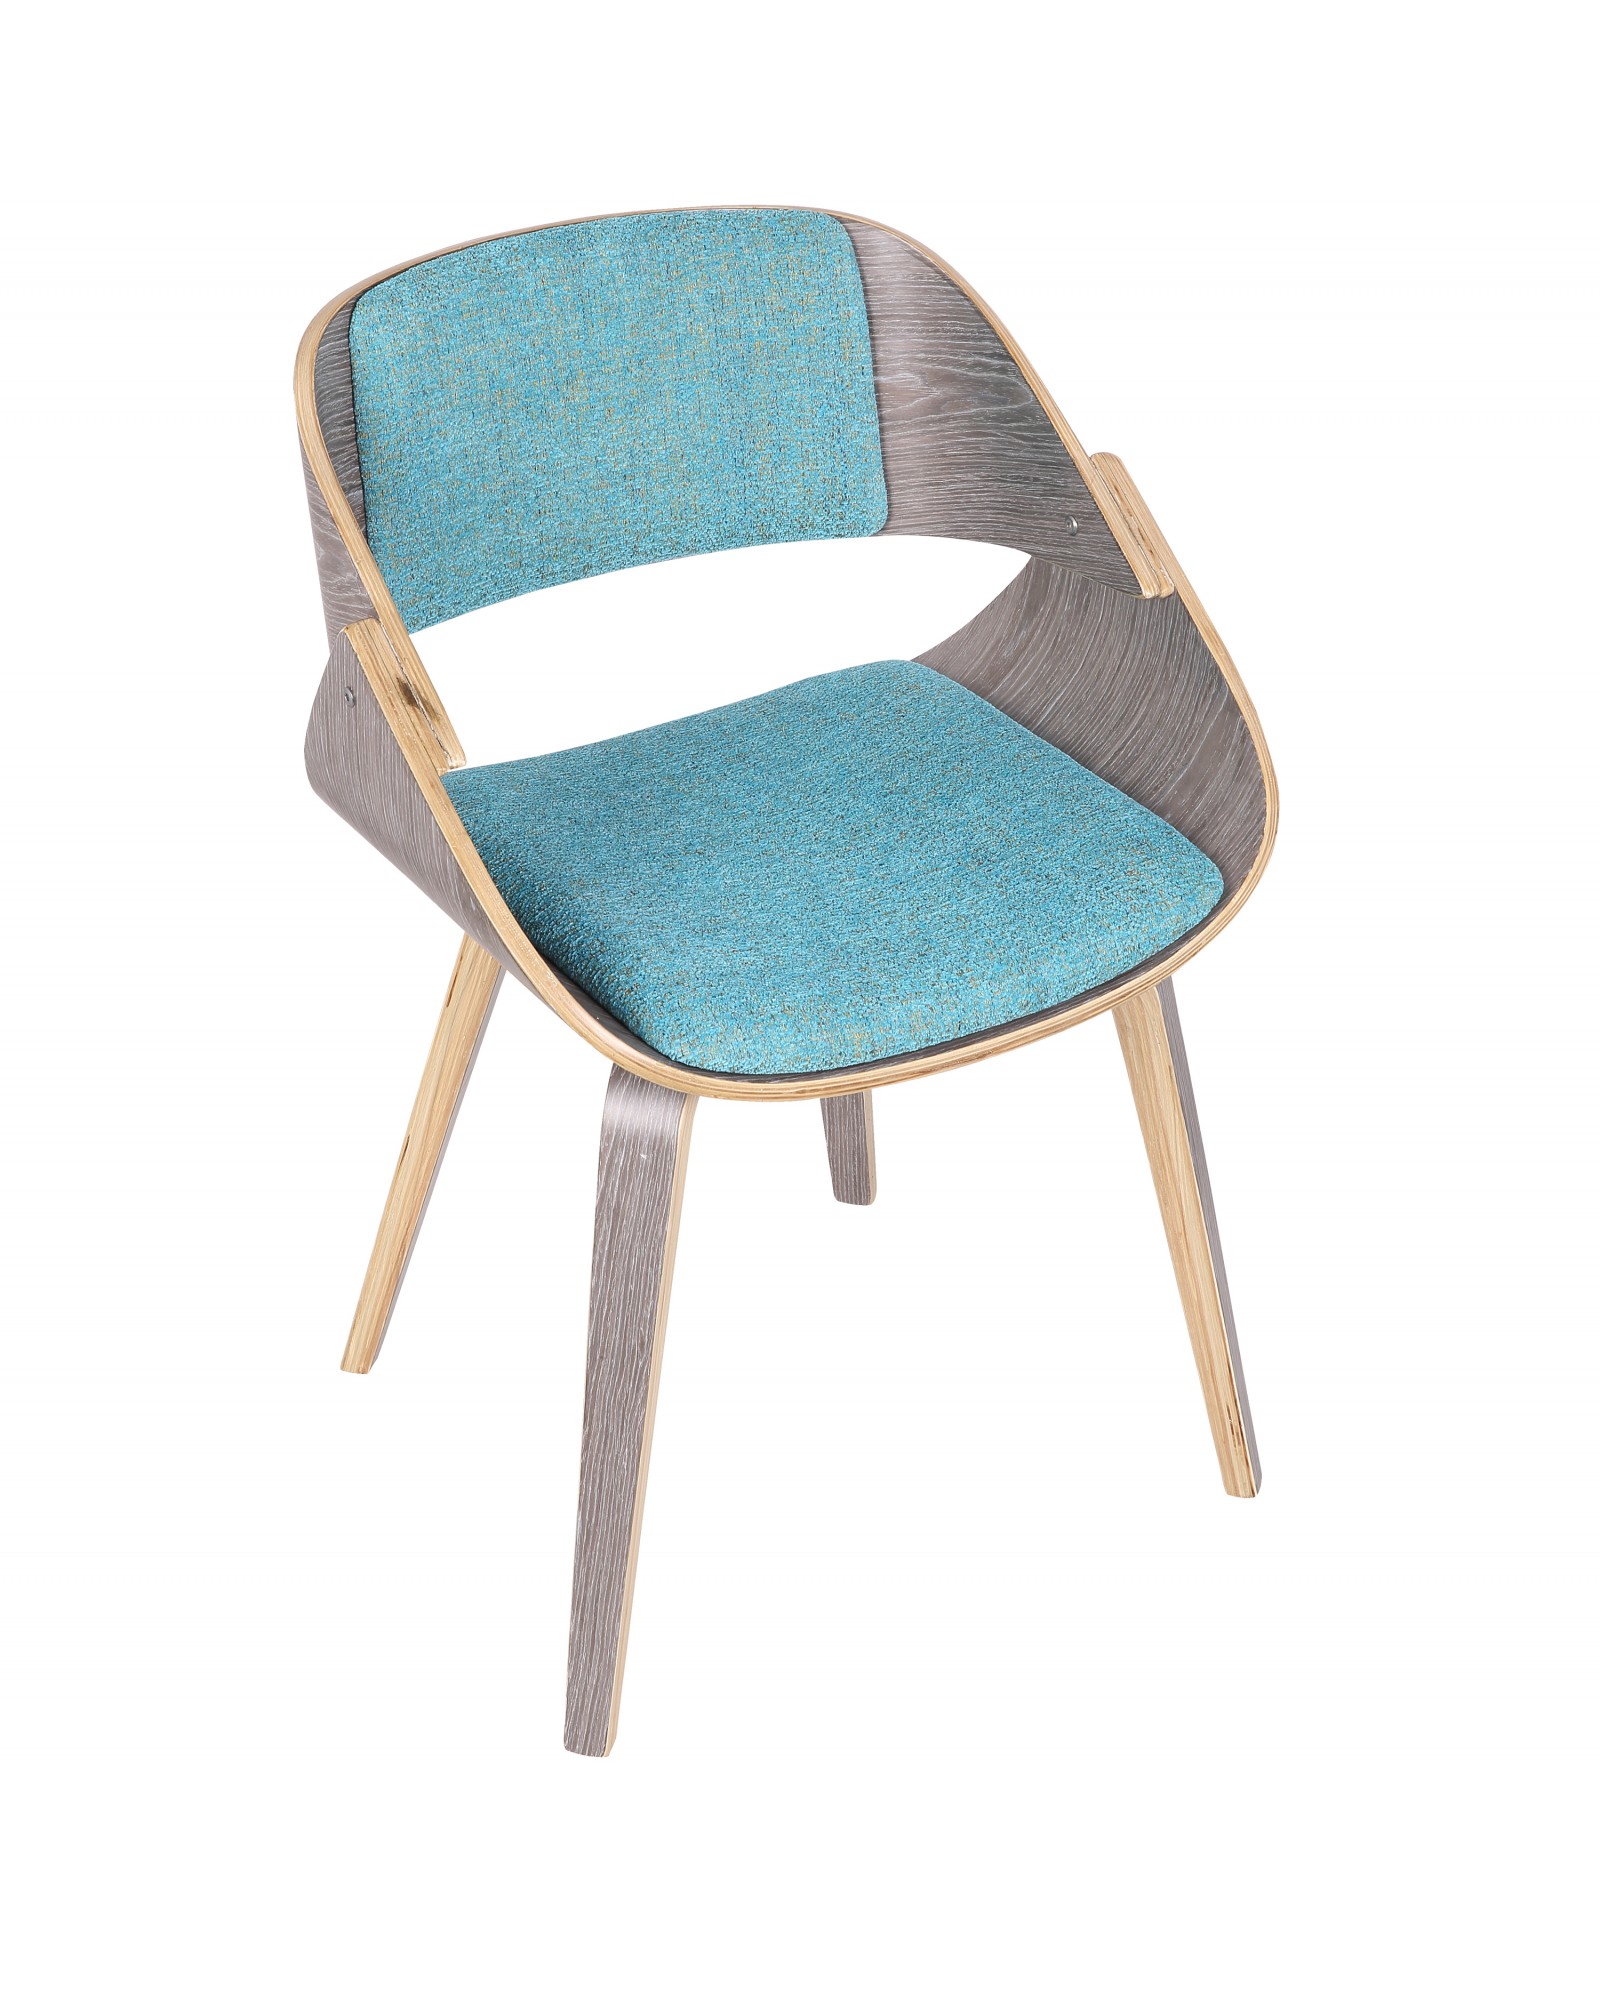 Fortunato Mid-Century Modern Dining/Accent Chair in Light Grey Wood with Aqua Fabric